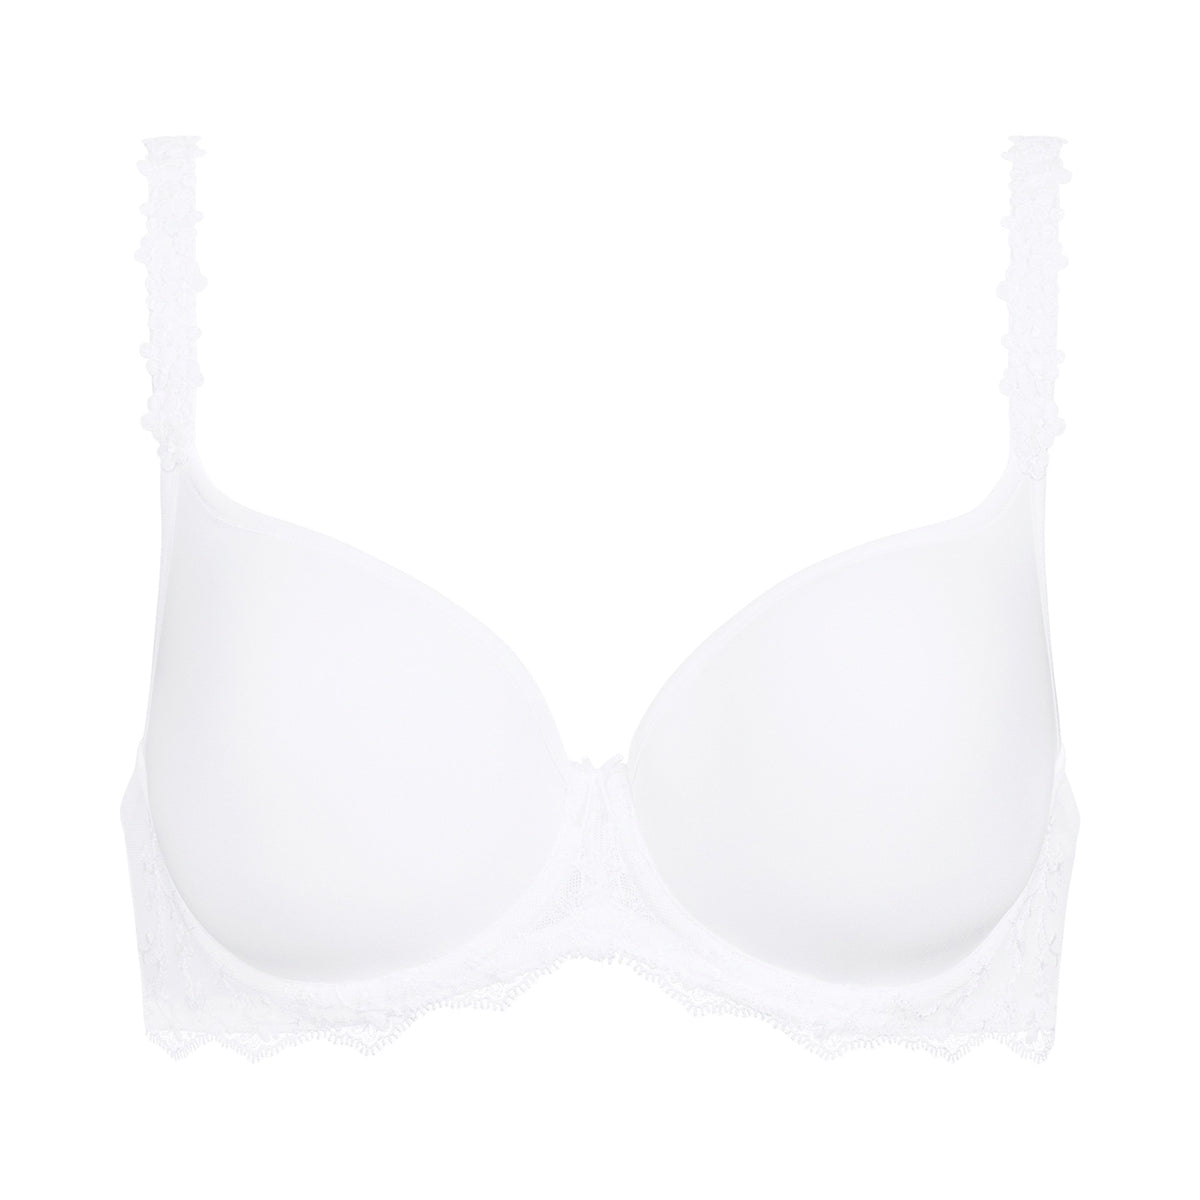 I'm MeiMei Bras Mall Freeshipping , fashion bras 3 colors style